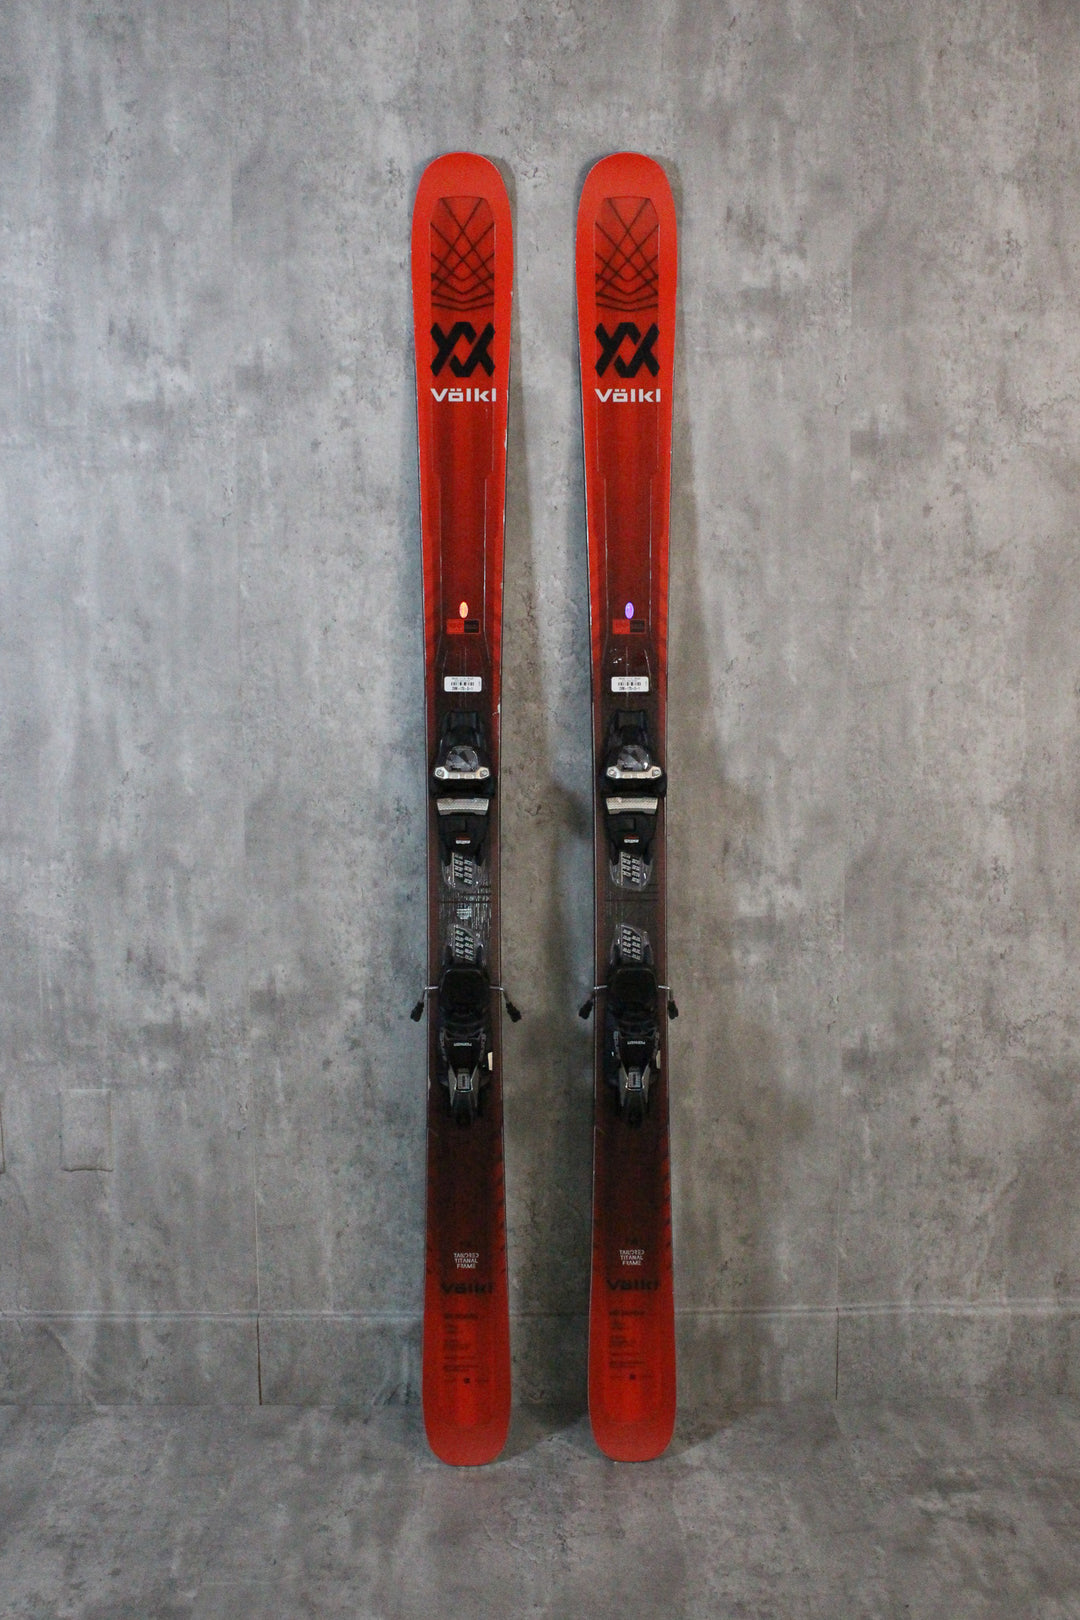 The Völkl M6 Mantra, a benchmark for high-performance all-mountain skis, offers impressive versatility this season. With its Tailored Titanal Frame and Tailored Carbon Tip, it maintains legendary edge-hold and precise turning. Ideal for both groomers and varied terrain, the M6 Mantra ensures exceptional performance. Available as used skis in Park City.